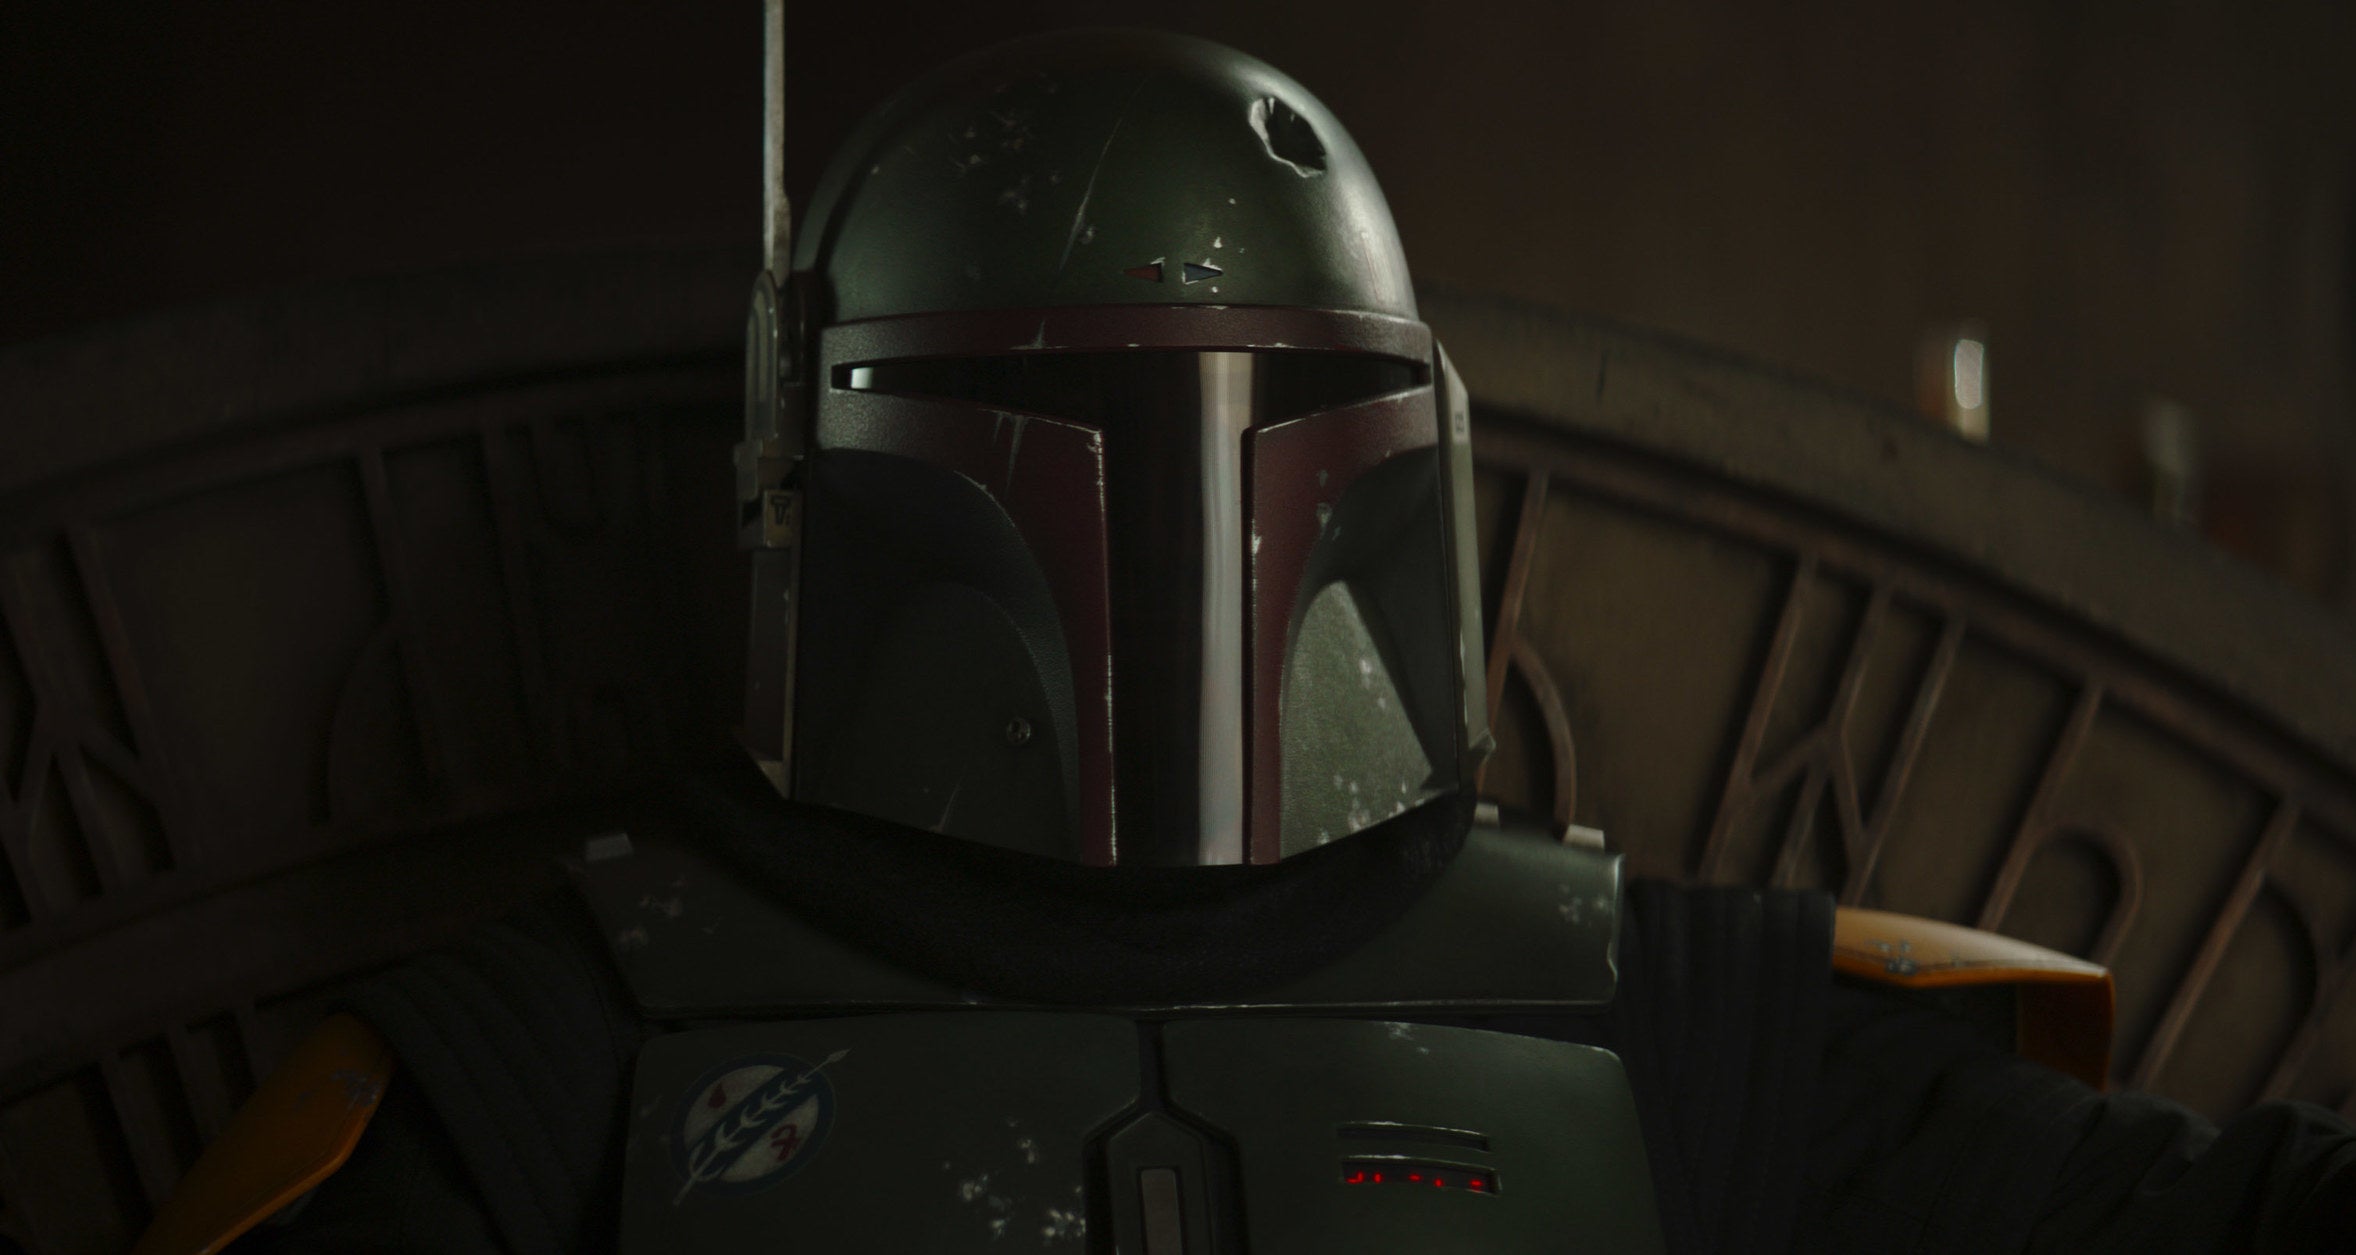 Boba Fett sits with his mask on